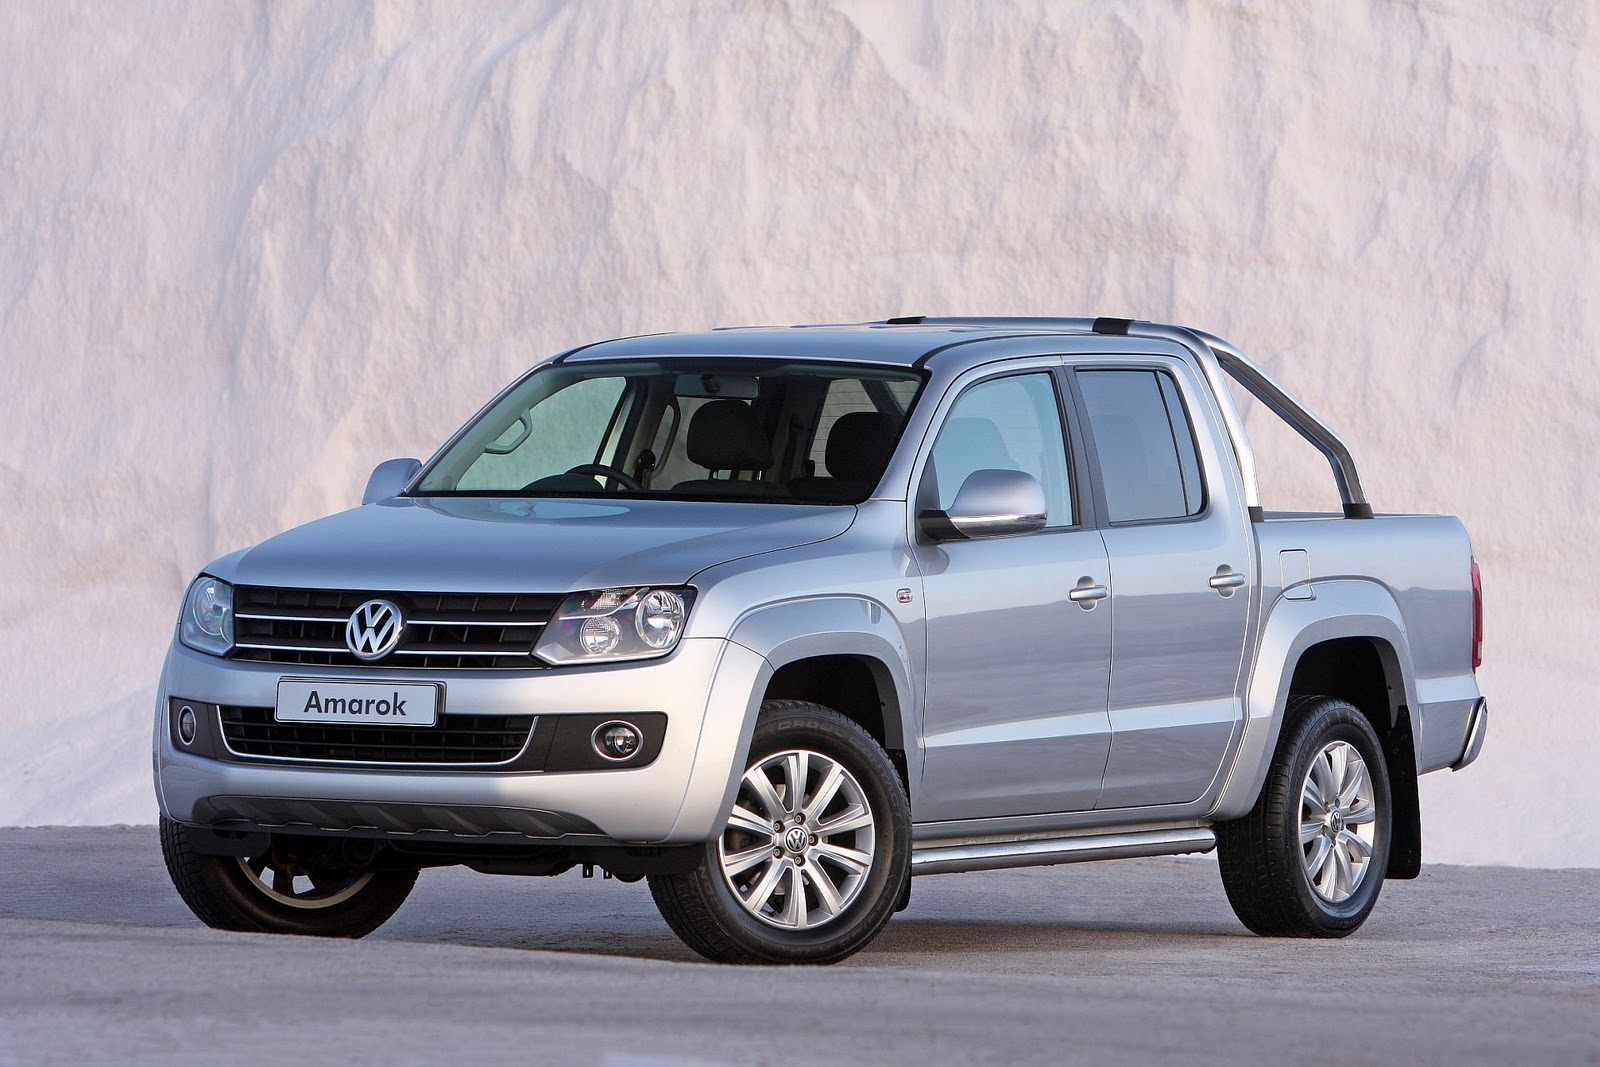 BIG AMAROK NOW COMES IN SMALL PETROL DOSES ~ wallpaper word